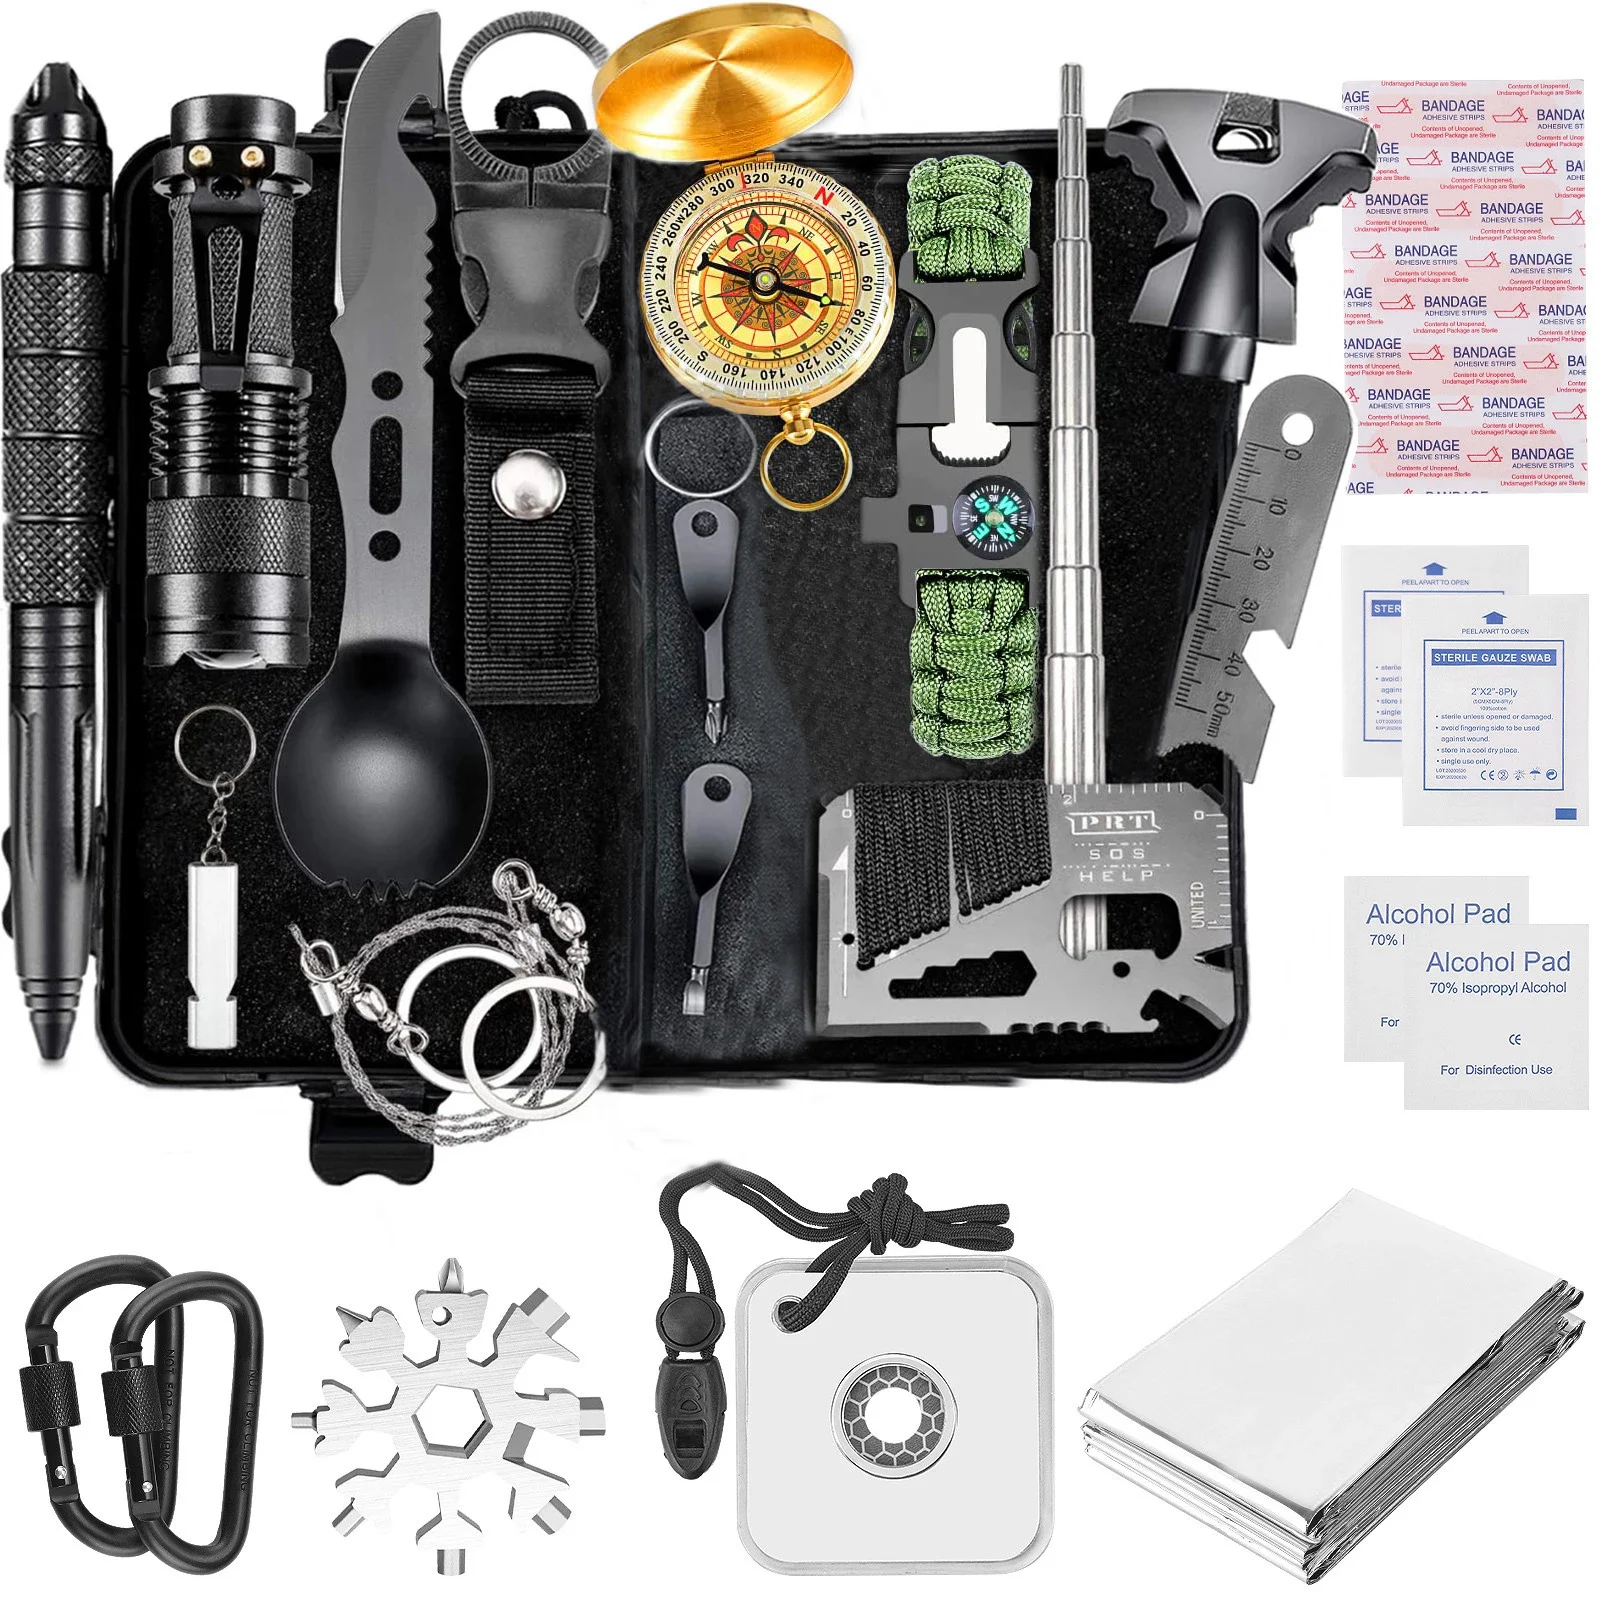 D equipment kit 22 in 1 professional tactical gadgets stuff tactical tool for emergency thumb200